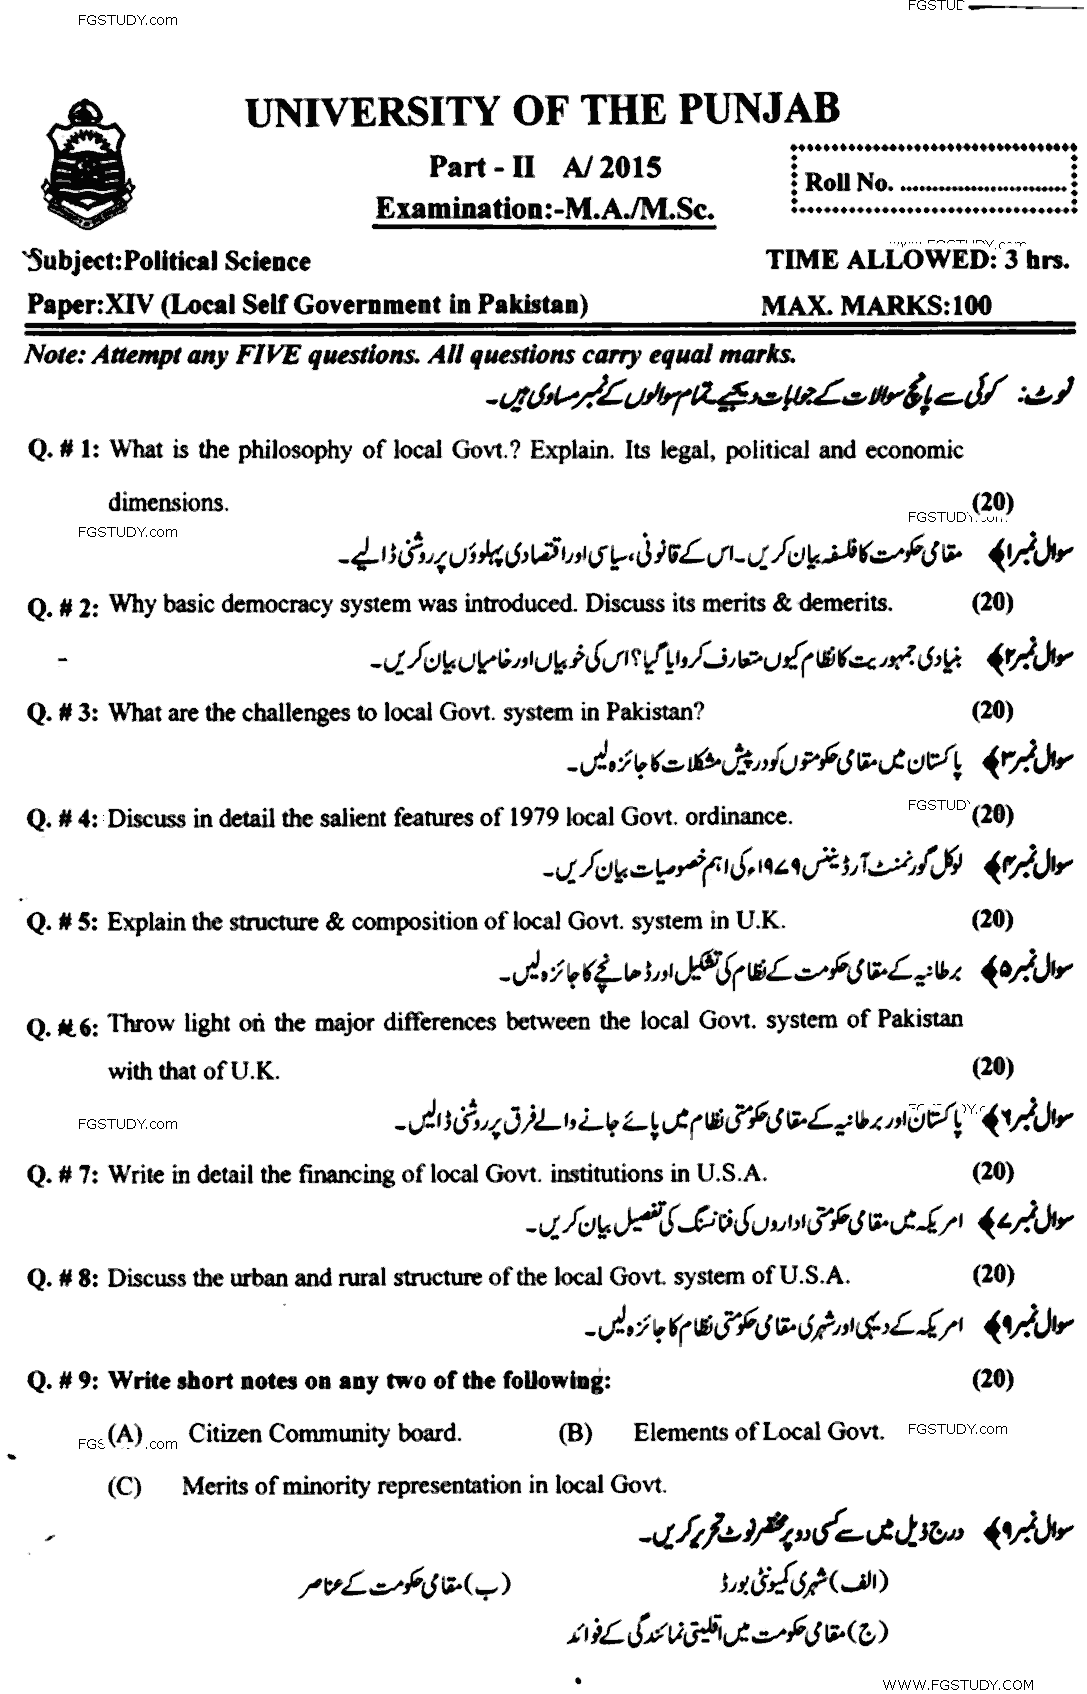 MA Part 2 Political Science Local Self Government In Pakistan Past Paper 2015 Punjab University